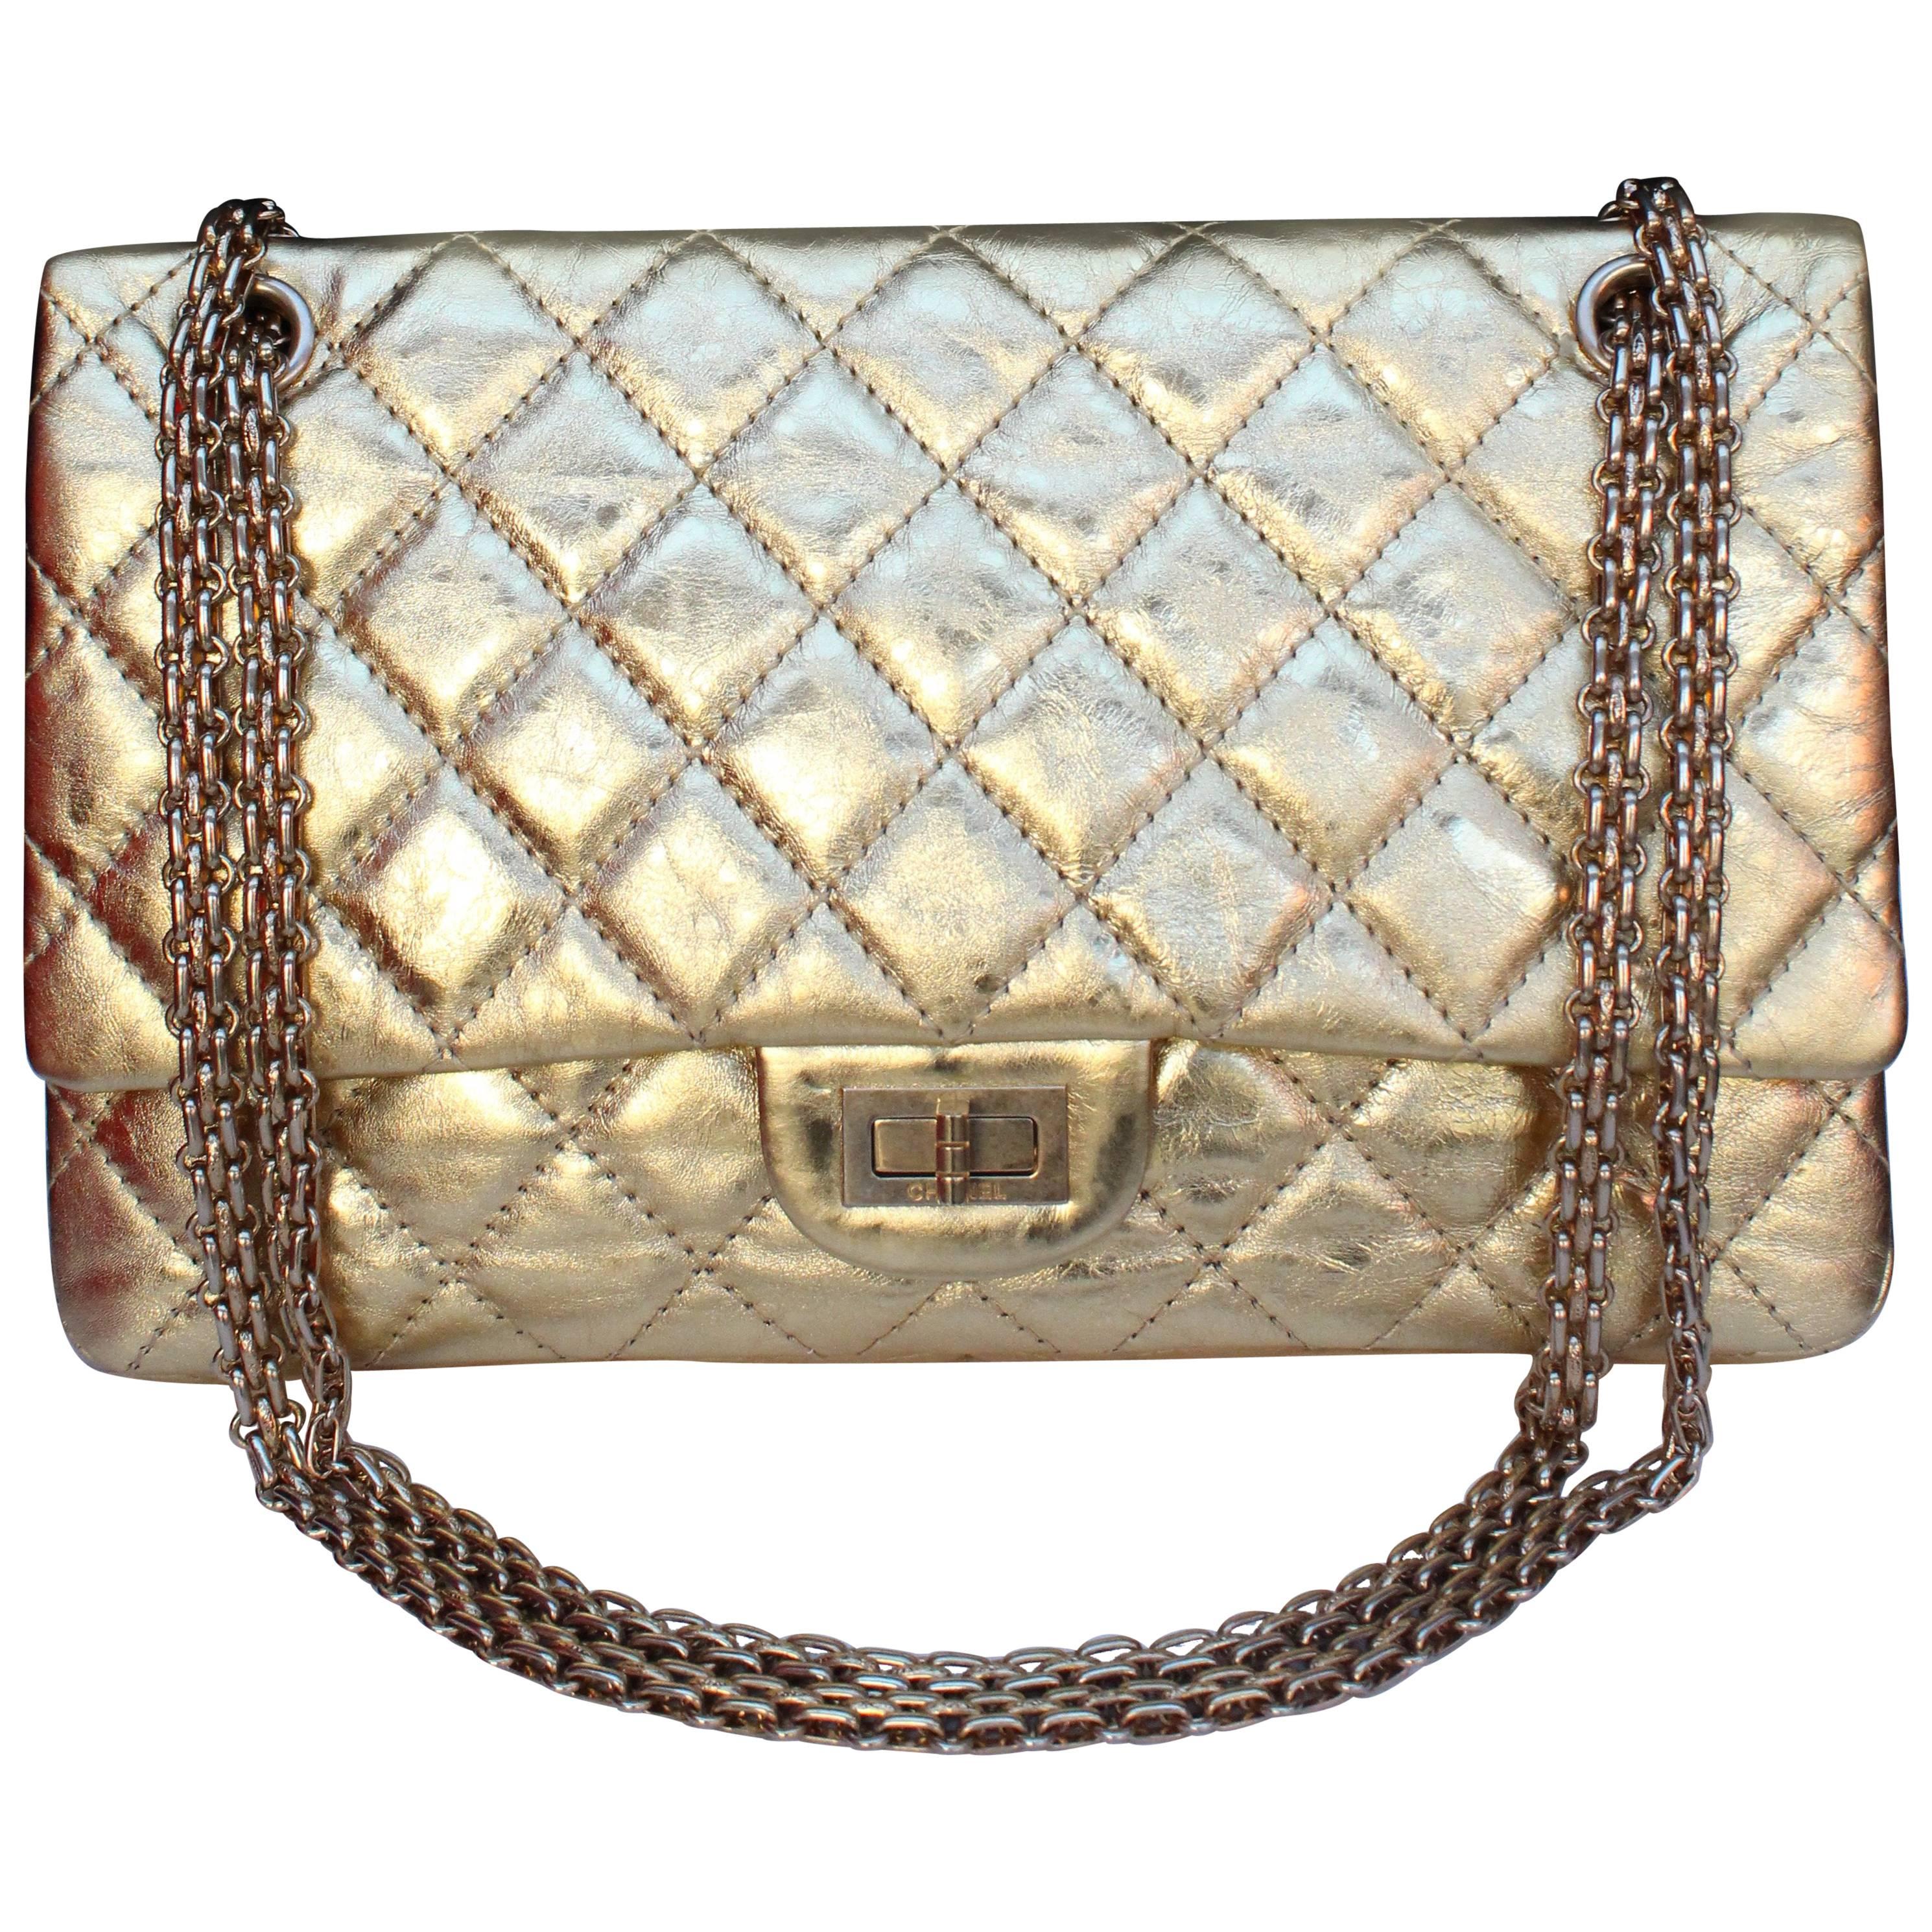 Chanel quilted golden leather bag, 2.55 Model, limited edition